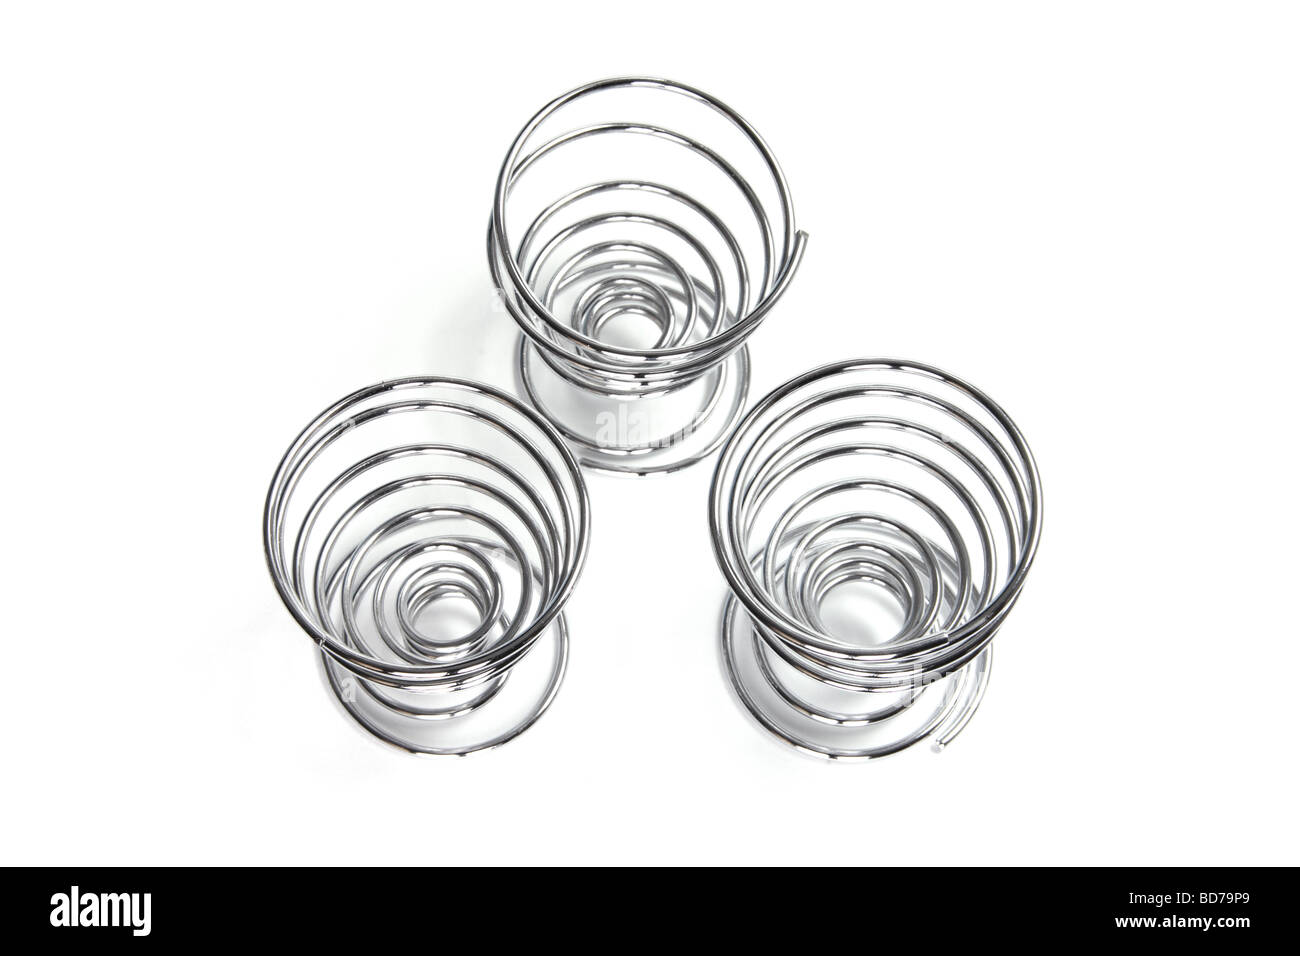 Spiral Egg Cups Stock Photo